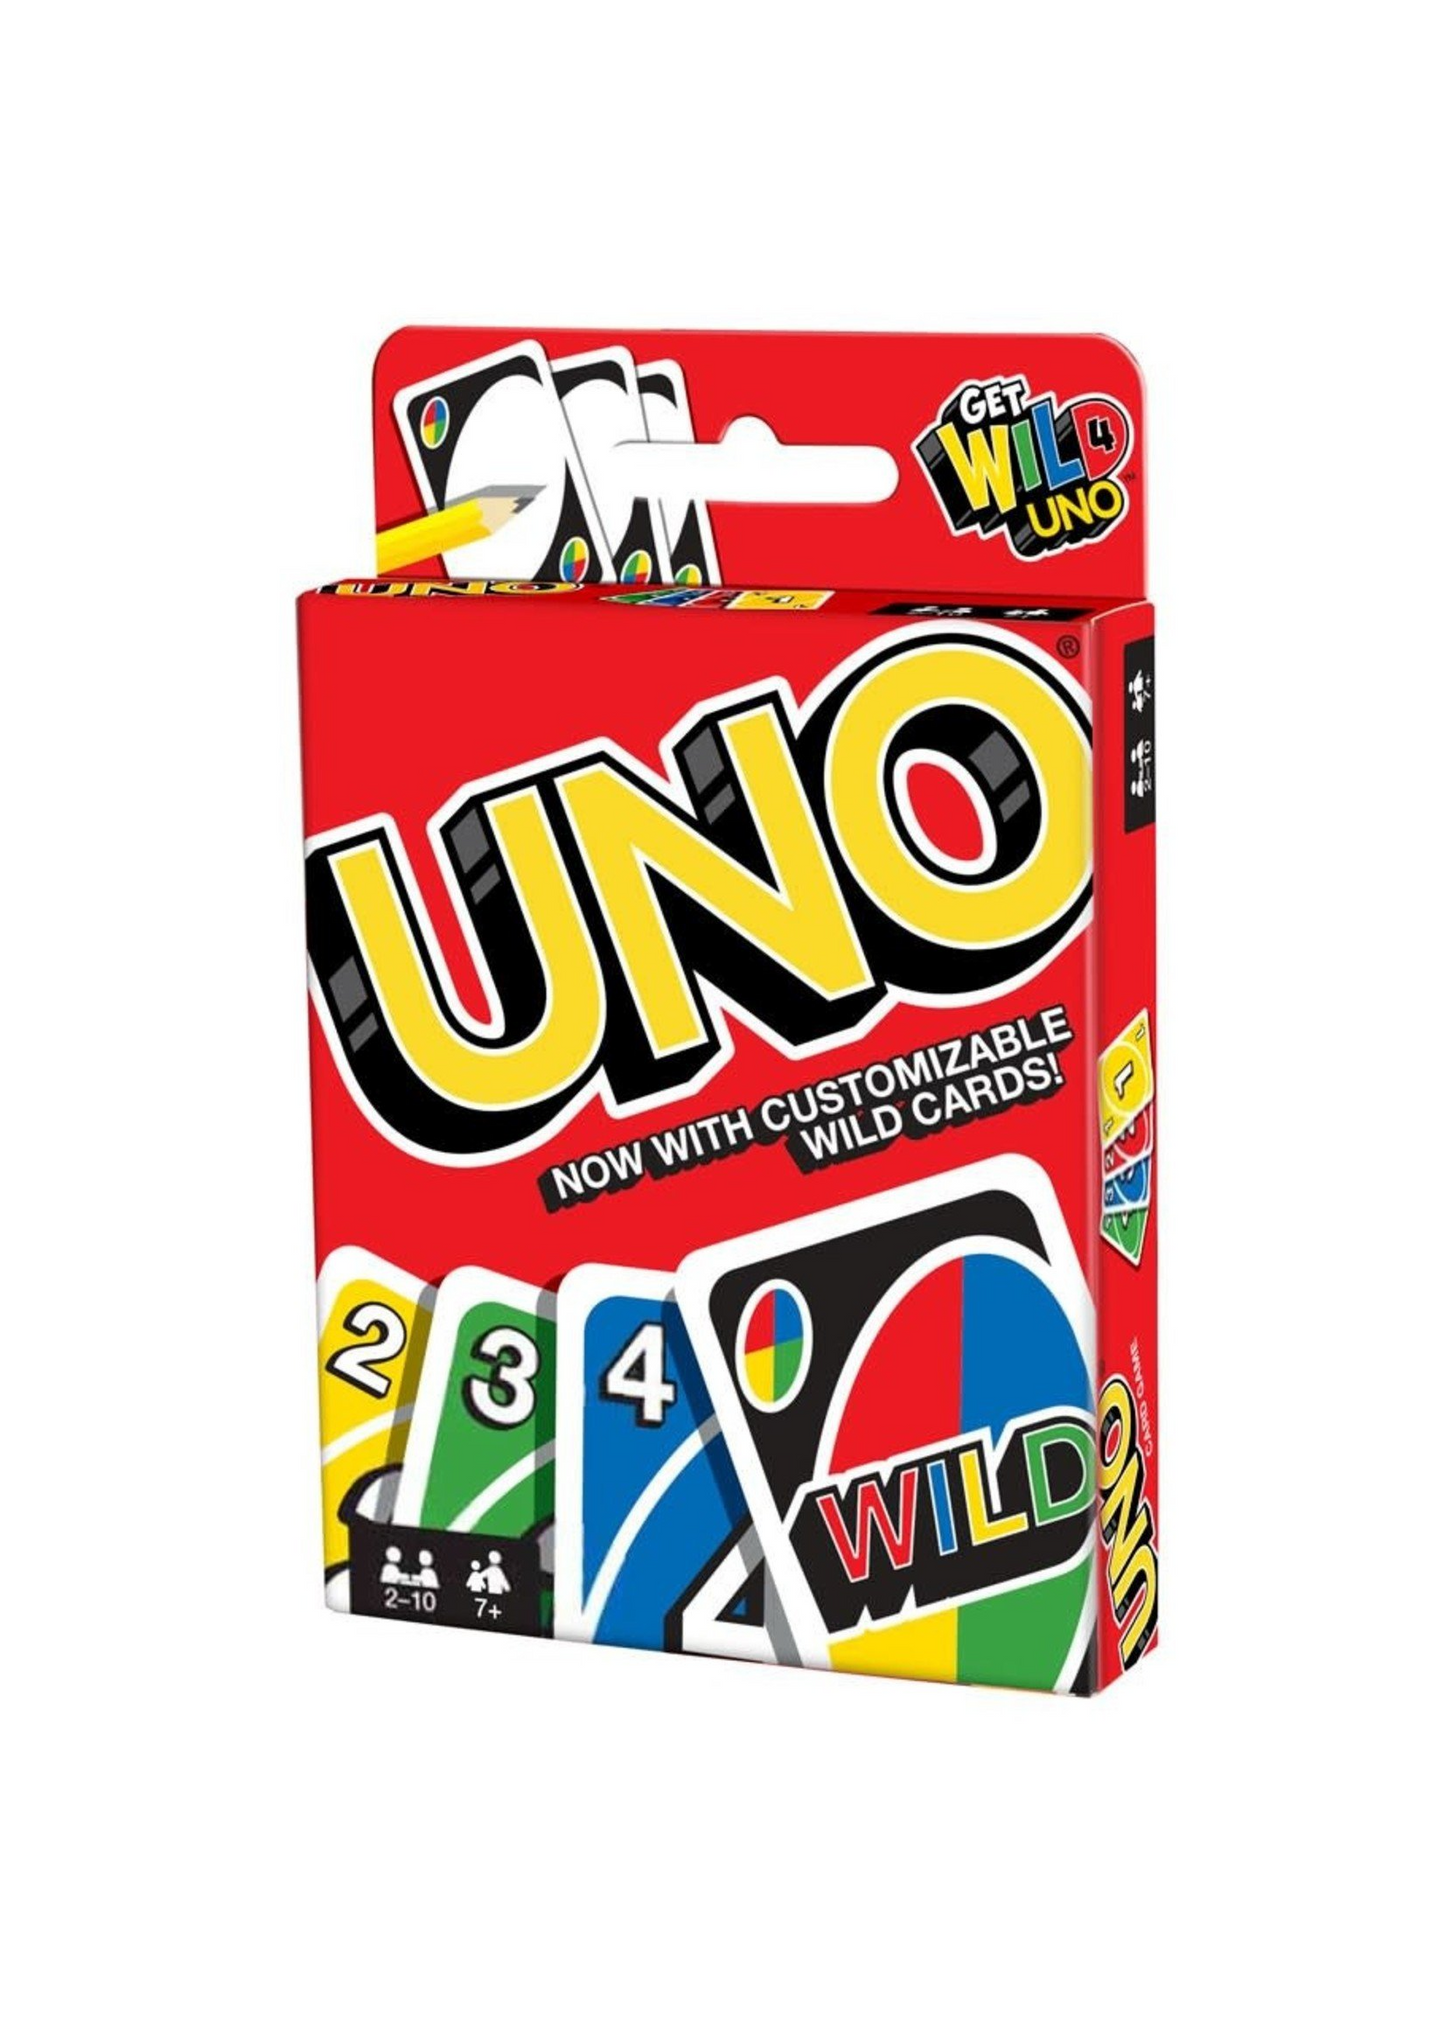 UNO - Card Game